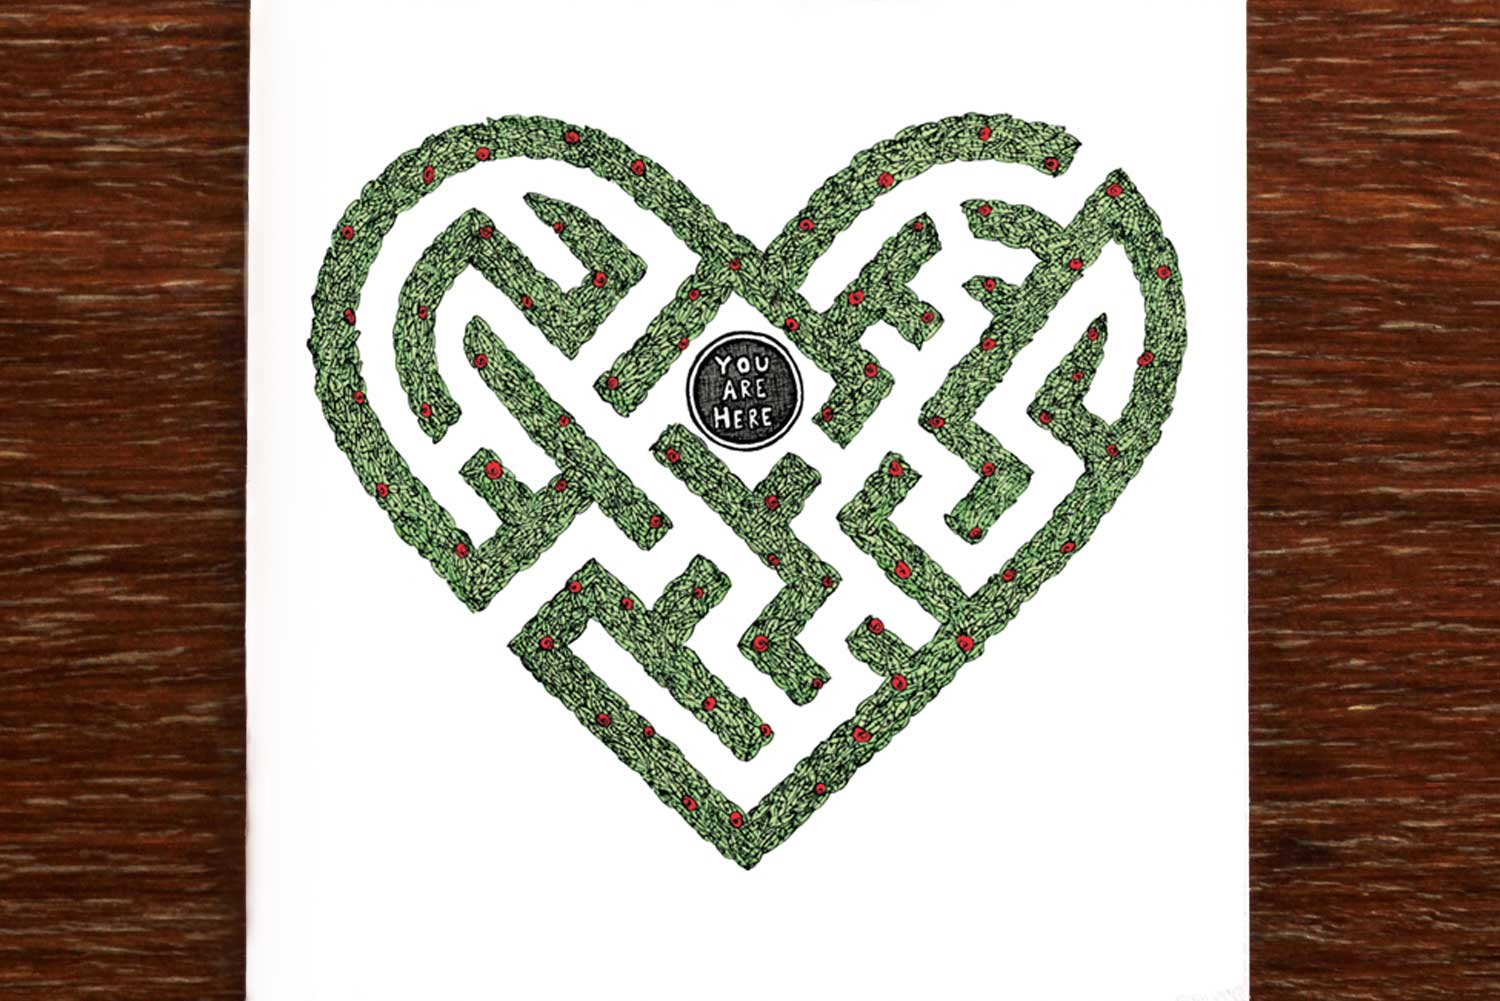 Greeting card with a heart shaped hedge maze and the words "You are here" in the centre.